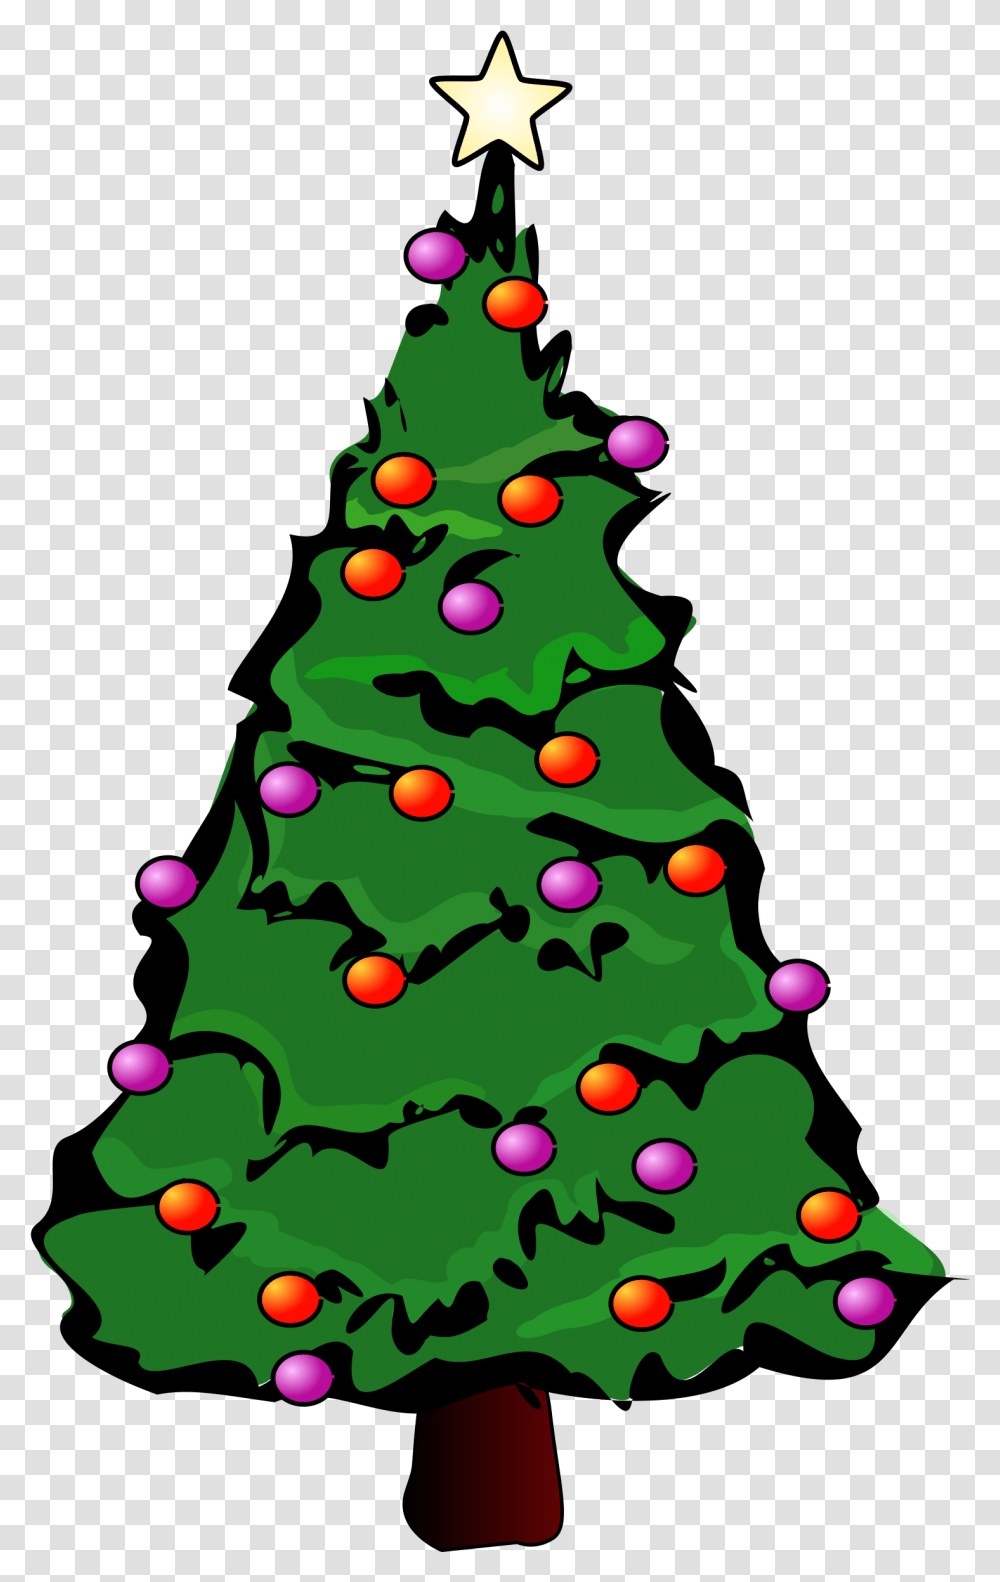 Christmas Tree Vector Christmas Tree Clipart Hd, Plant, Ornament, Star Symbol Transparent Png